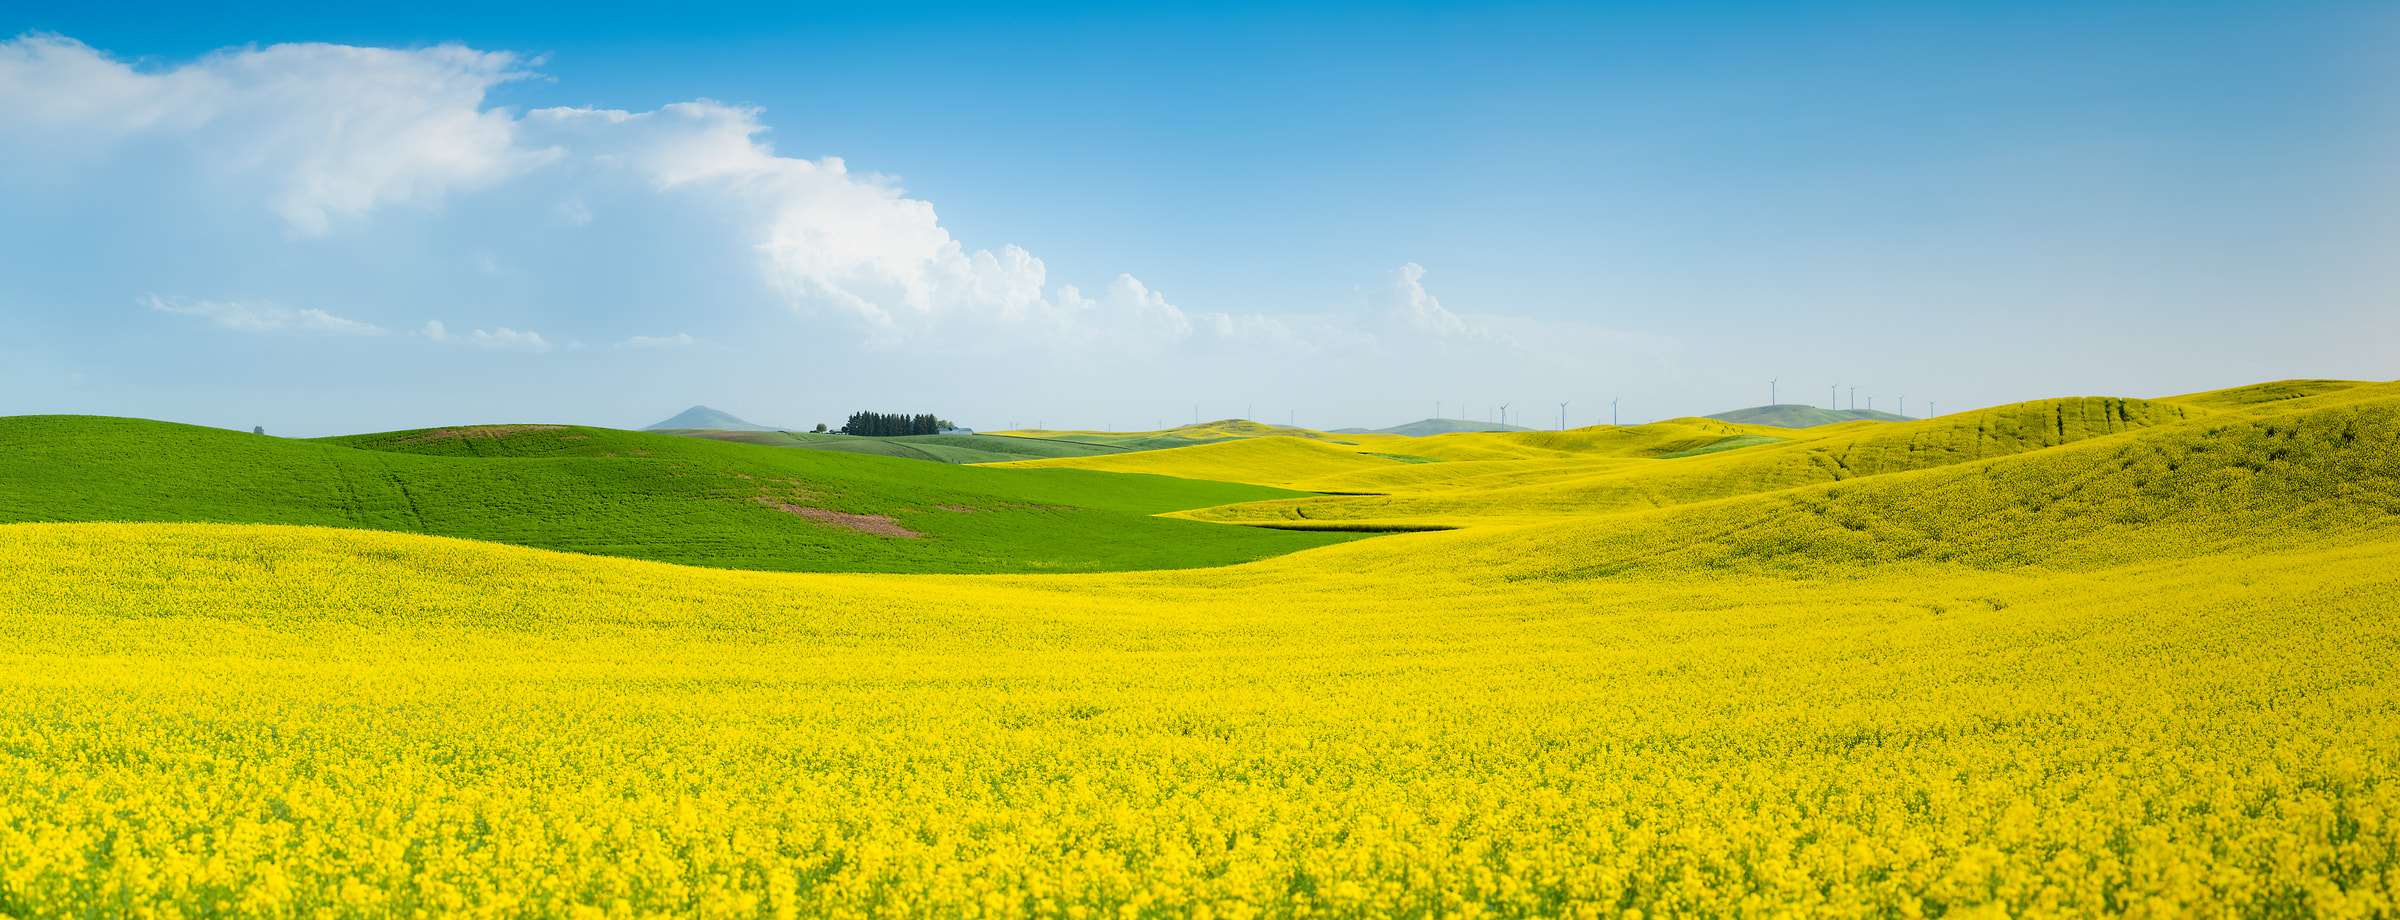 448 megapixels! A very high resolution, large-format VAST photo print of a green and yellow canola field; landscape photograph created by Greg Probst in Palouse, Washington.